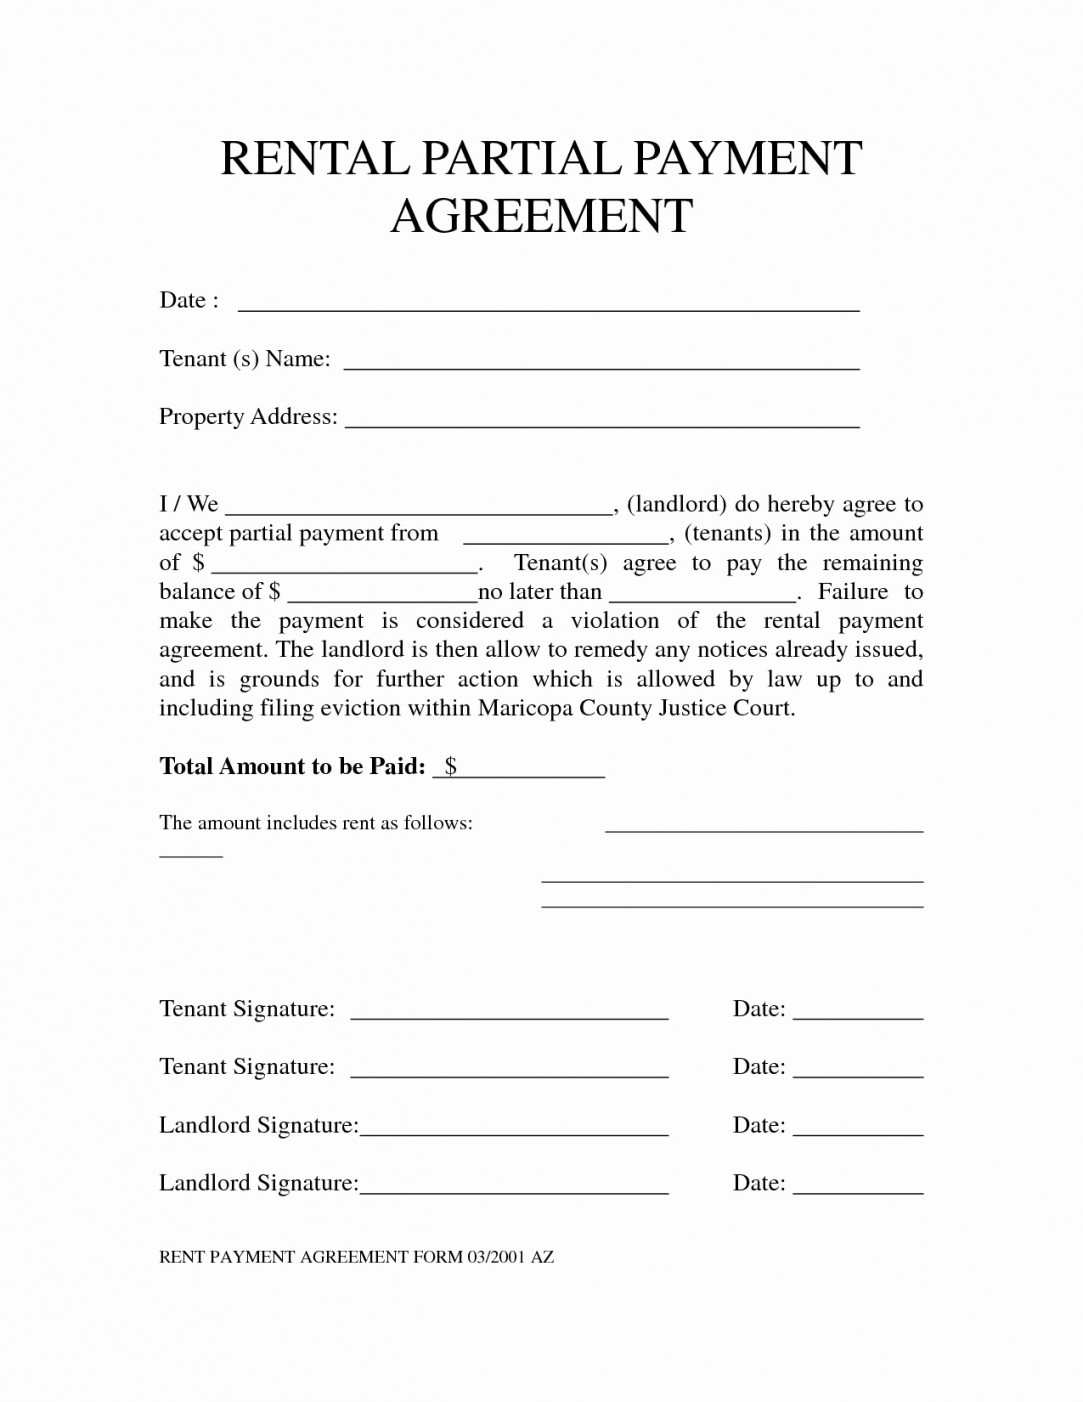 Profit Share Agreement Template Lostranquillos Document Simple Sharing